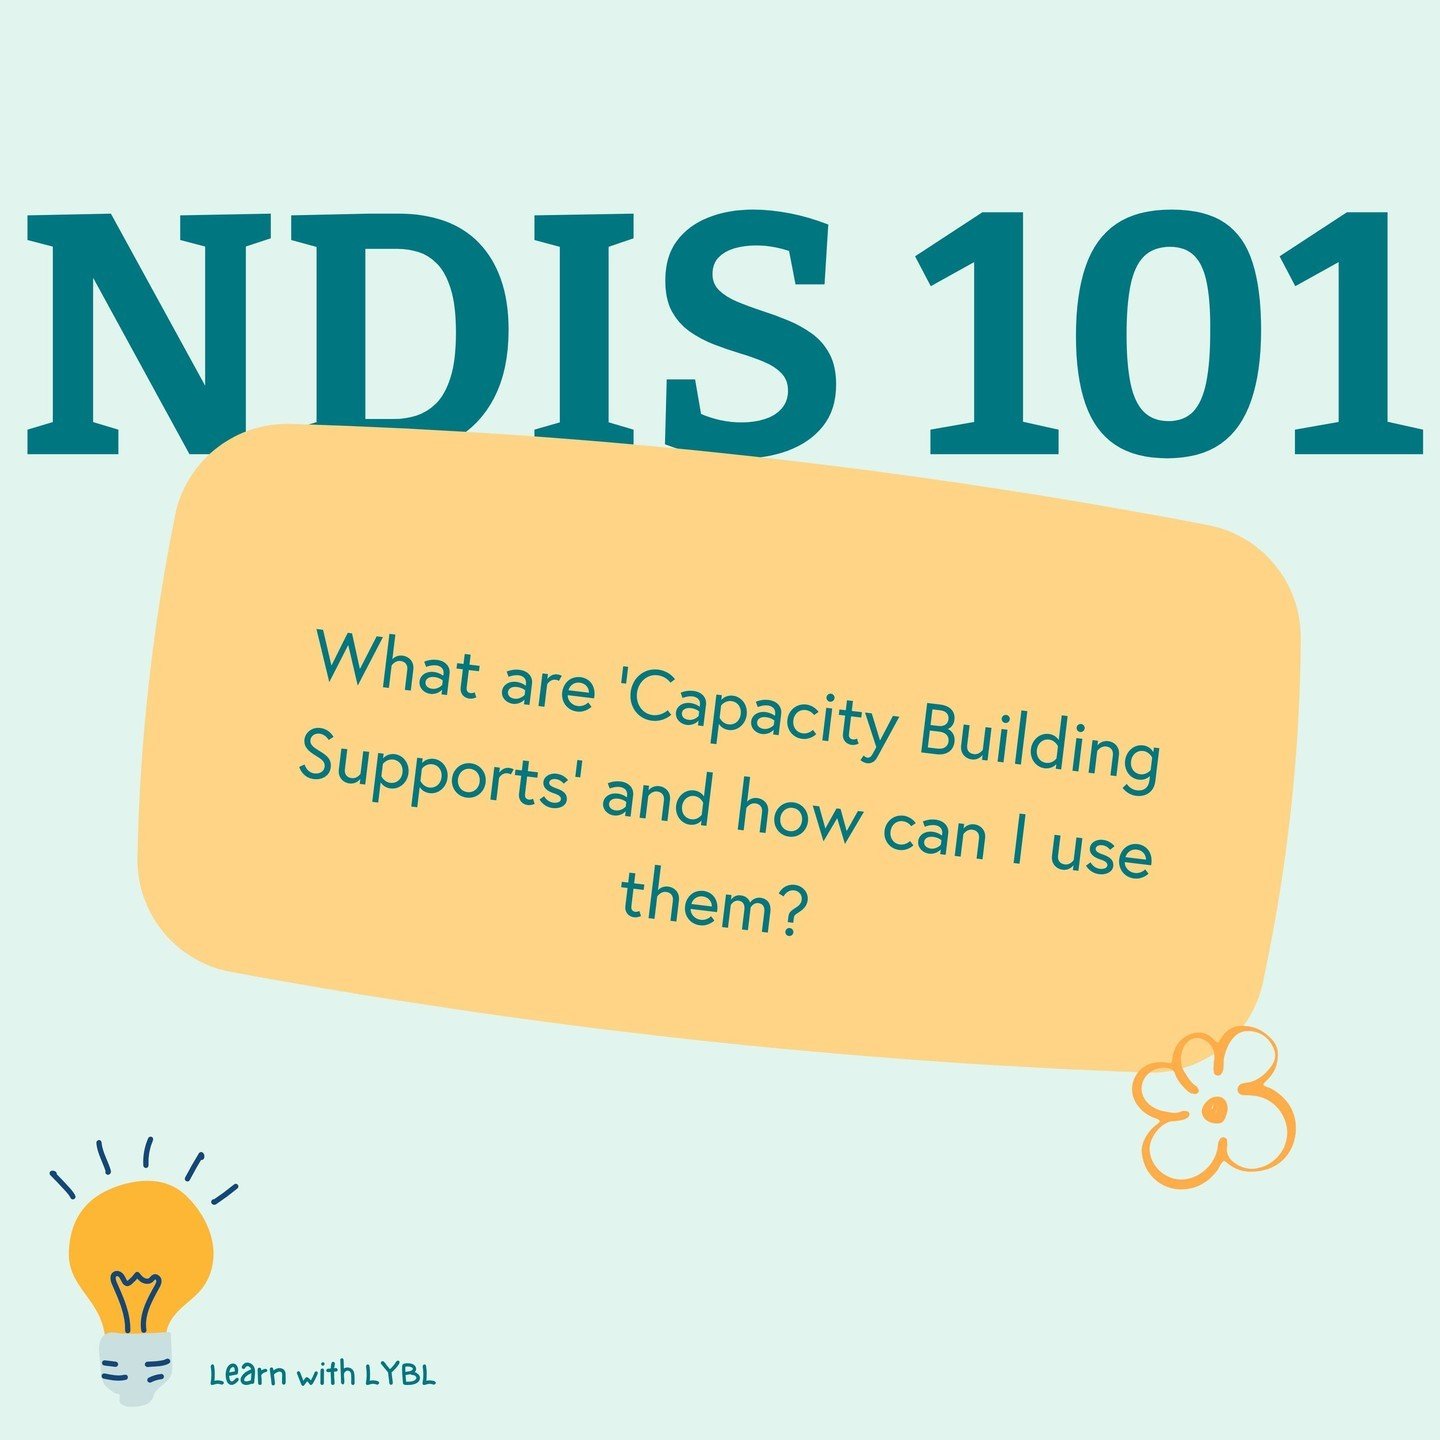 📘 NDIS 101: Your Family&rsquo;s Guide - Understanding Capacity Building Supports for Autism 📘

Hello LYBL families! In today's &quot;NDIS 101,&quot; let's explore Capacity Building Supports in the context of autism, their benefits, and how to effec